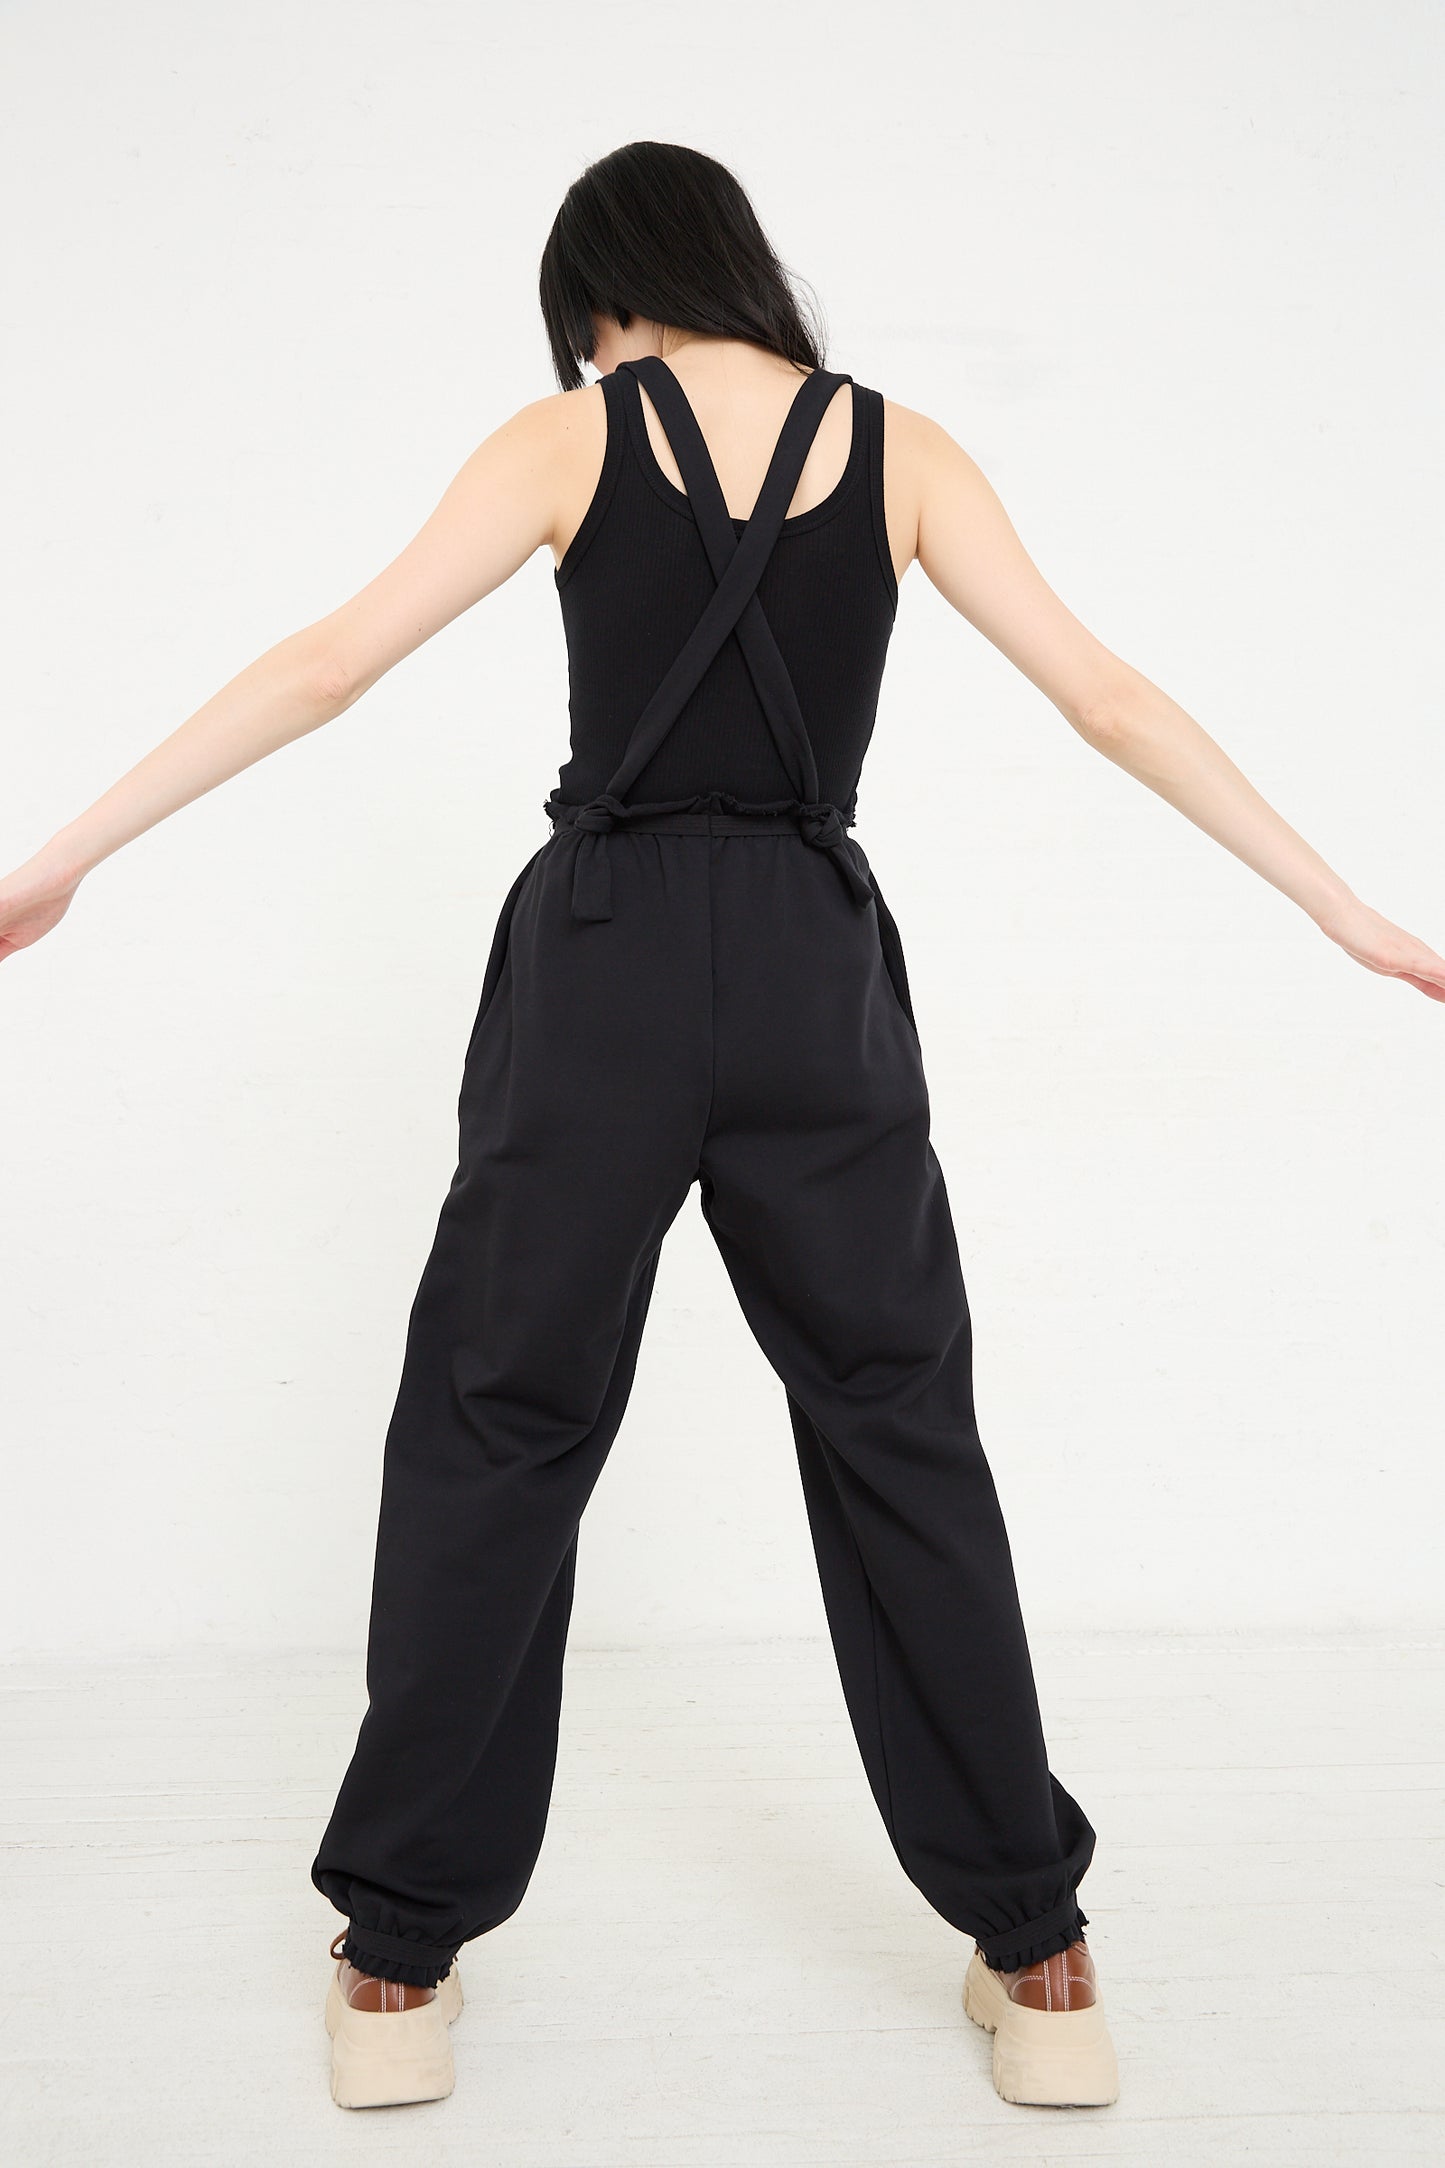 Woman standing with her back turned, wearing a Baserange Italian Fleece Route Sweatpant in Black with relaxed fit, against a white background.